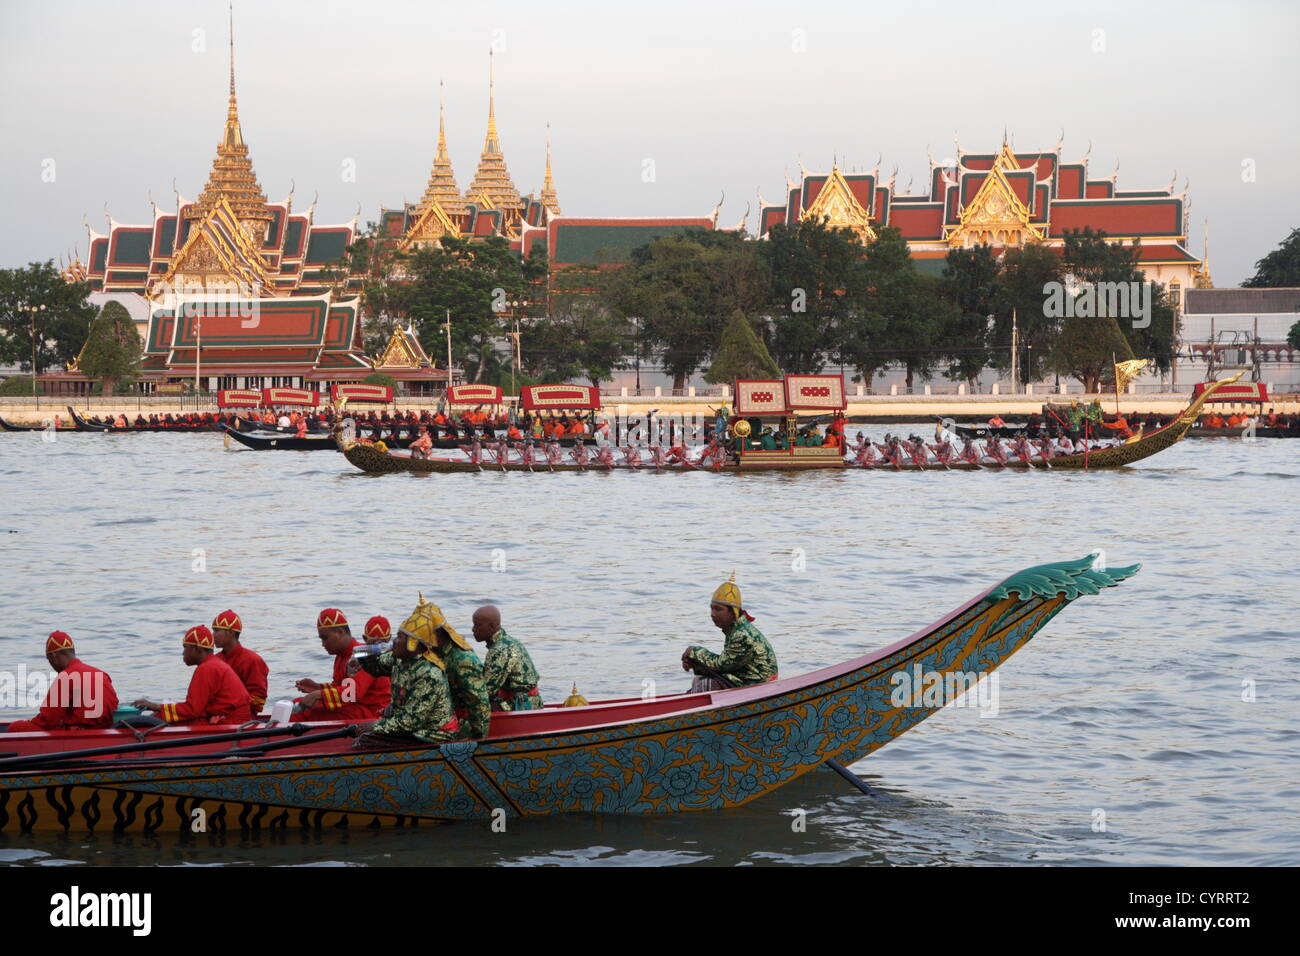 9th, November, 2012. Bangkok, Thailand. Sailors on boat in the Thai Royal Barge Procession.  Over 2,000 rowers in 52 barges took part in the procession from Va Su Kri pier to Wat Arun Temple , held for the first time in five years and presided over by Crown Prince Maha Vajiralongkorn,.  The Royal Barge Procession to Present the Royal Kathin Ceremony in a part of The Celebration on the Auspicious Occasion of His Majesty the King’s 85th Birthday Anniversary 5th December 2012. Stock Photo